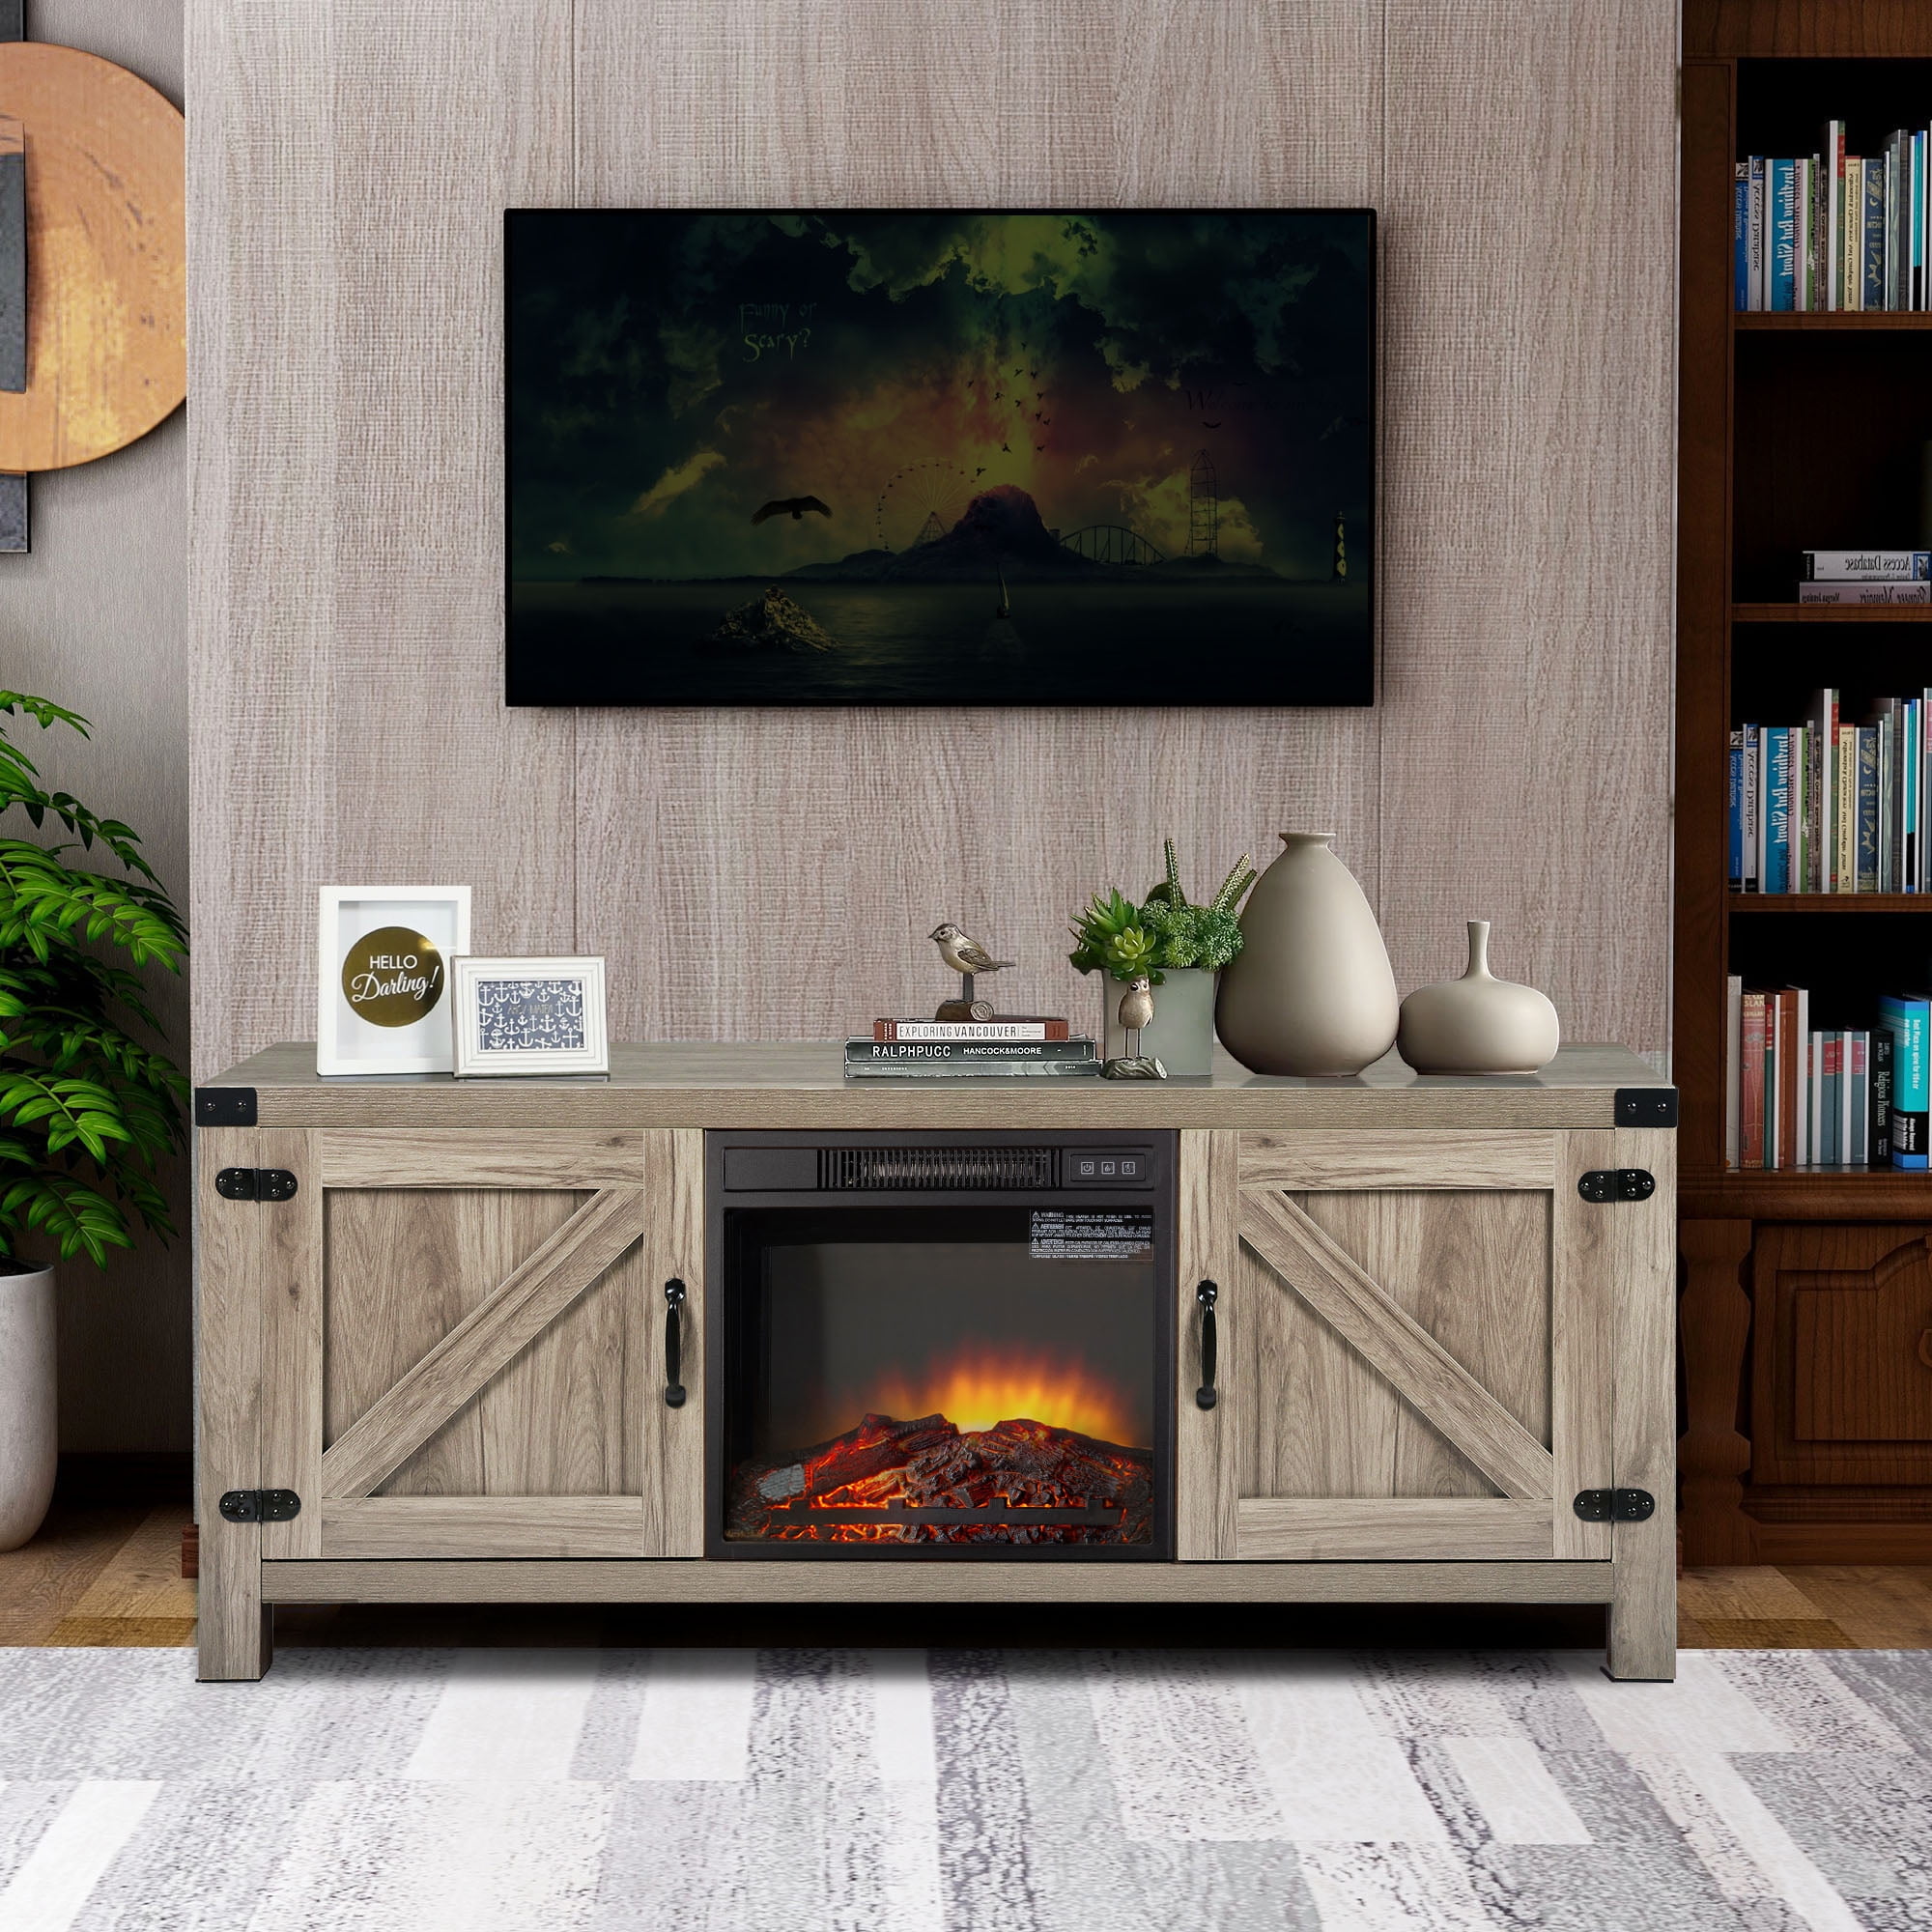 58 Inches Media Console Table w// Fireplace Tangkula Fireplace TV Stand for TVs up to 65 Inches 1500W Electric Fireplace Stove TV Storage Cabinet w//Remote Control Adjustable Brightness /& Heat